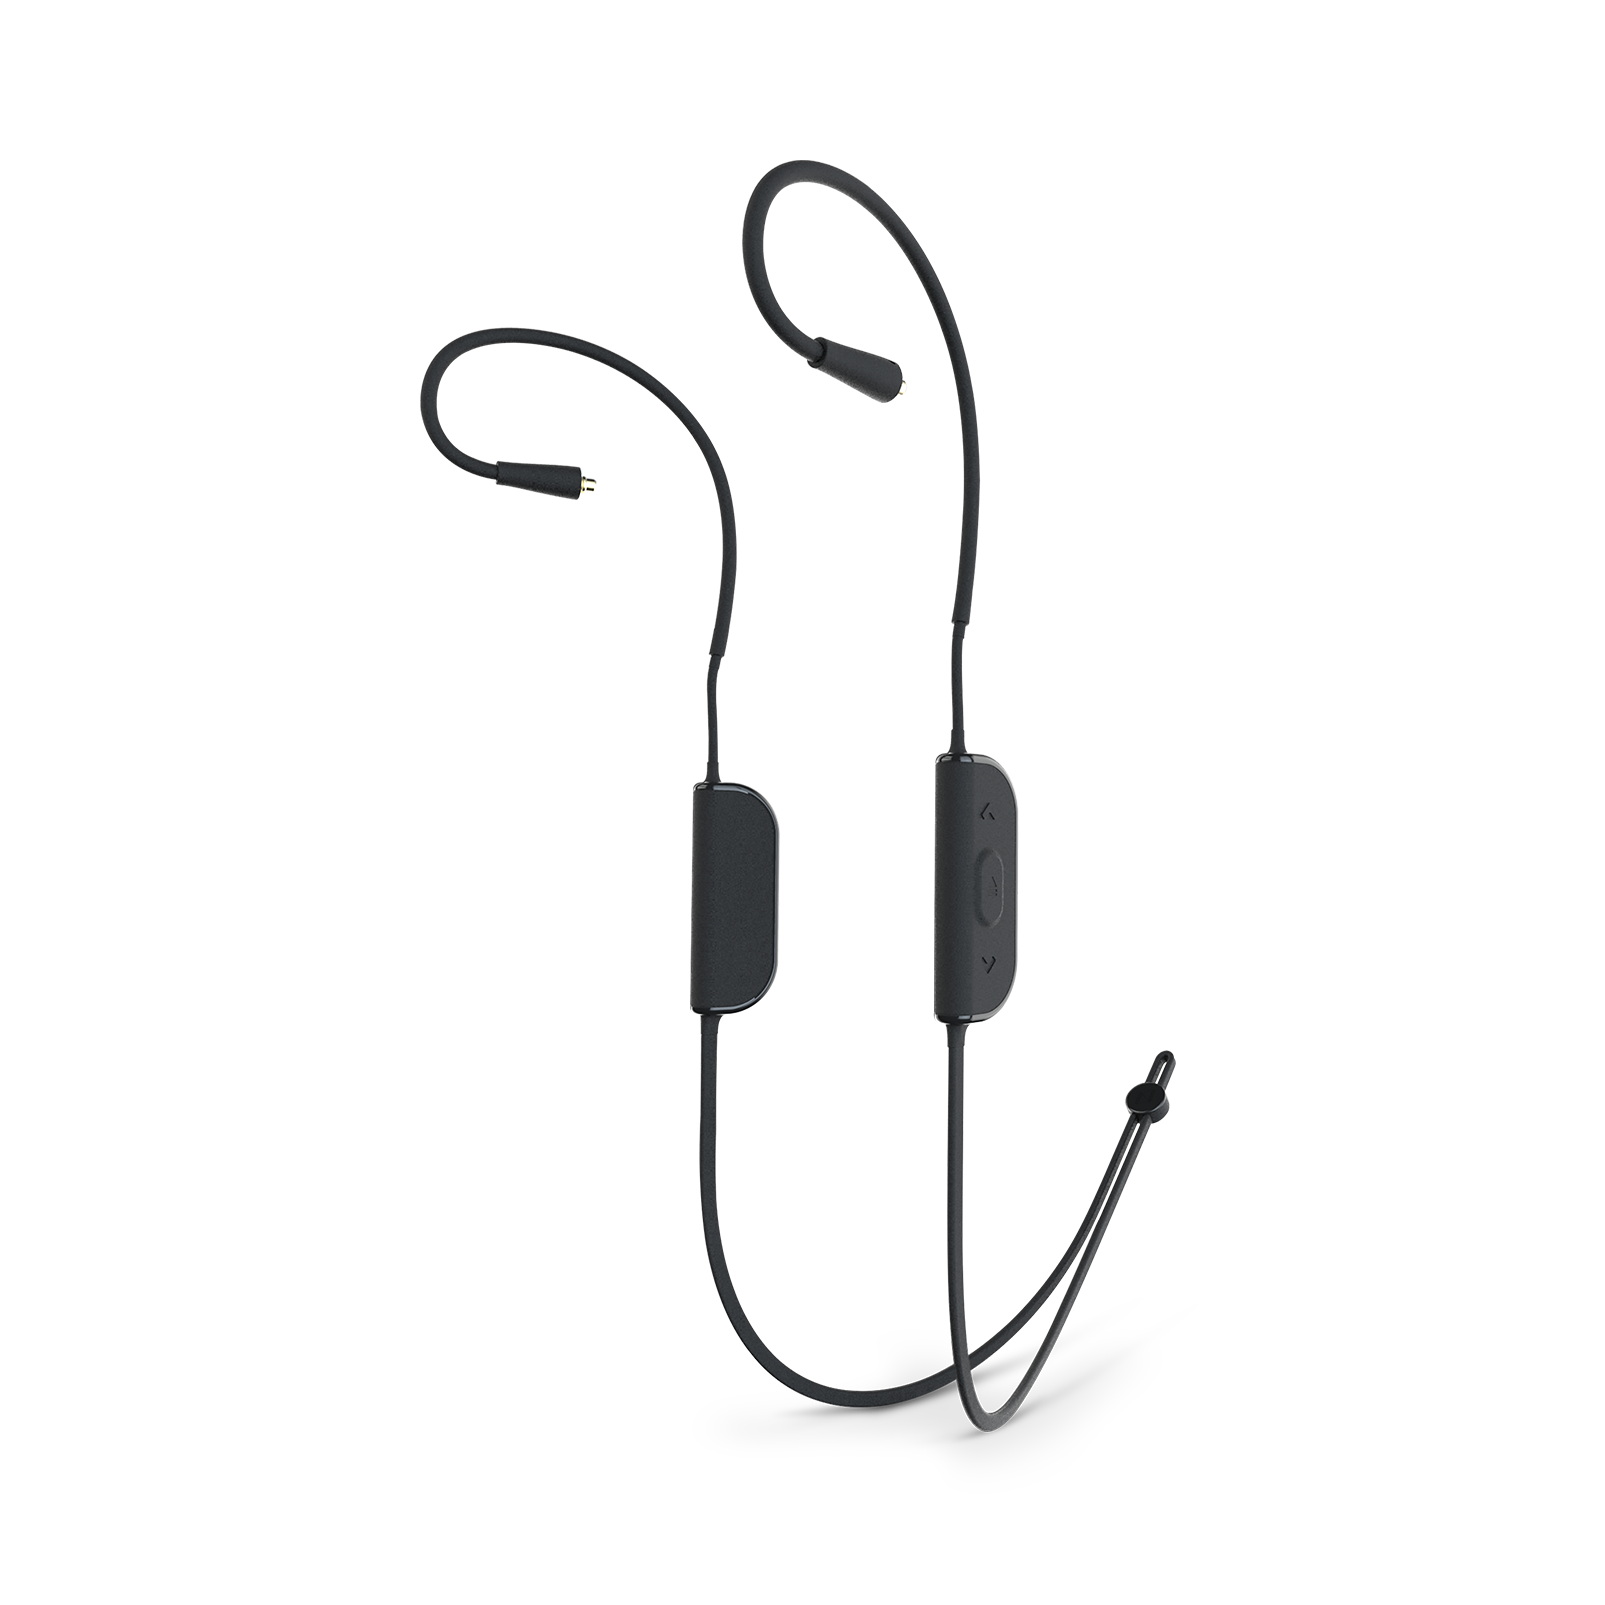 AKG N5005 - Black - Reference Class 5-driver configuration in-ear headphones with customizable sound - Detailshot 2